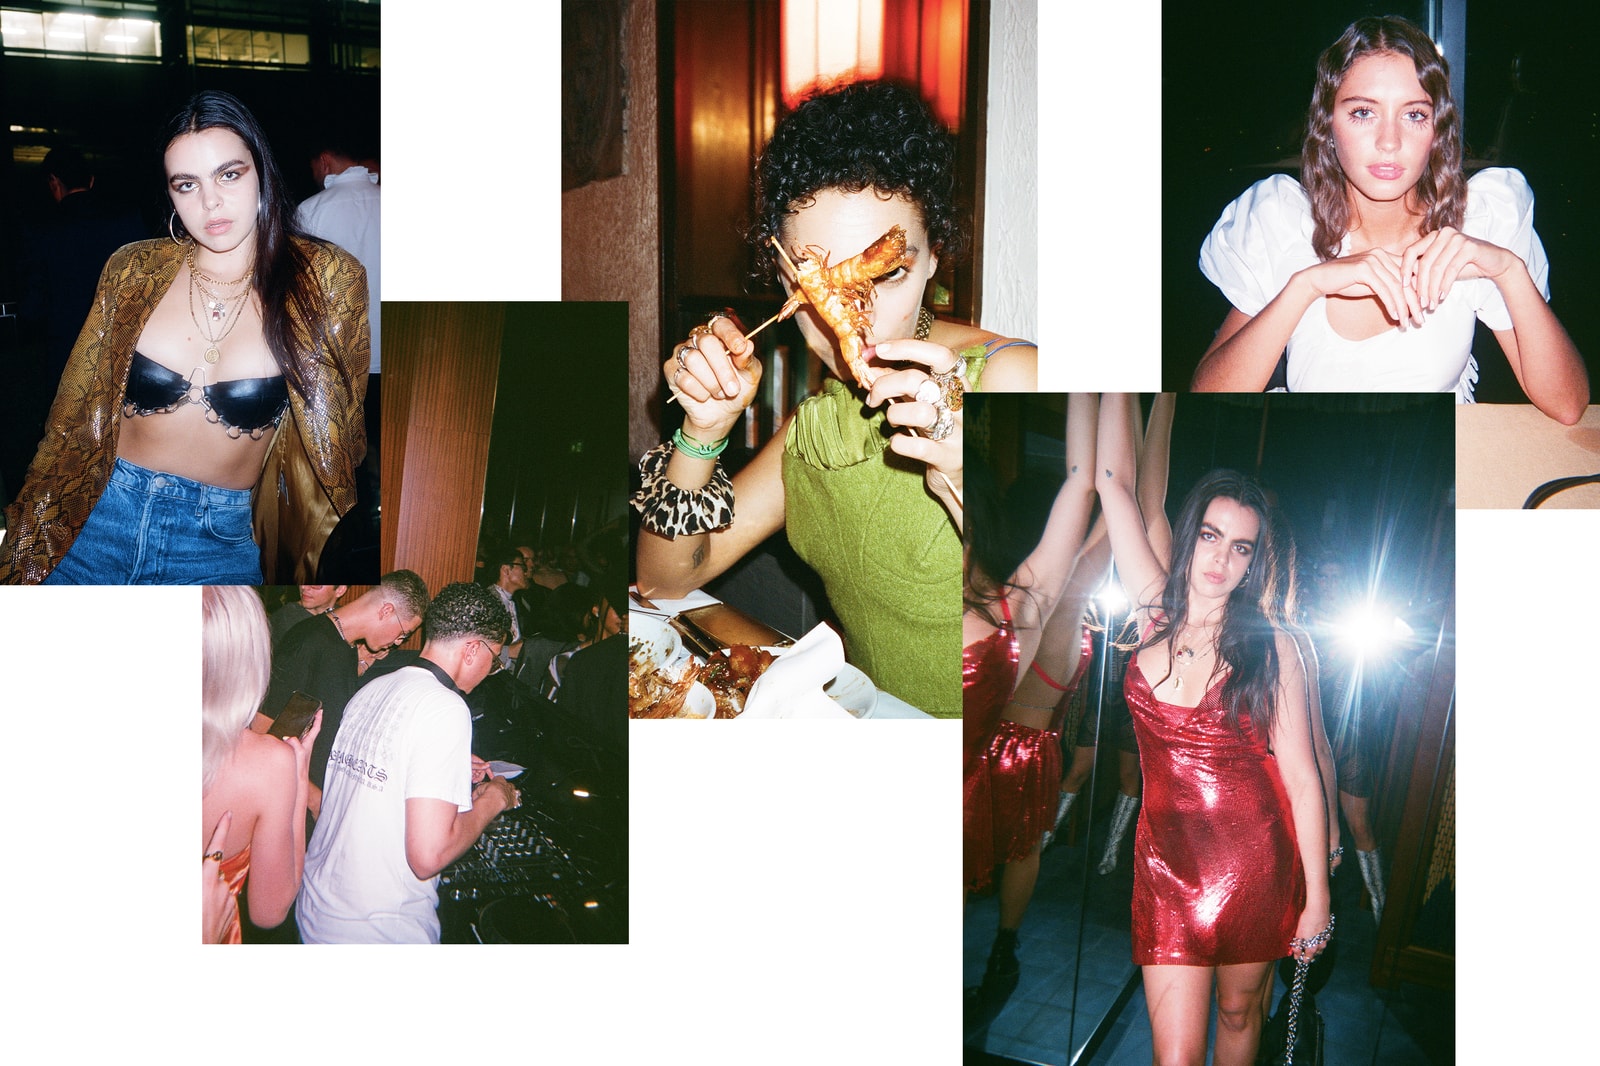 London Fashion Week SS20 Model Photo Diaries Bee Beardsworth Laura Chova Iris Law Gullyguyleo Events Parties A Day in The Life 